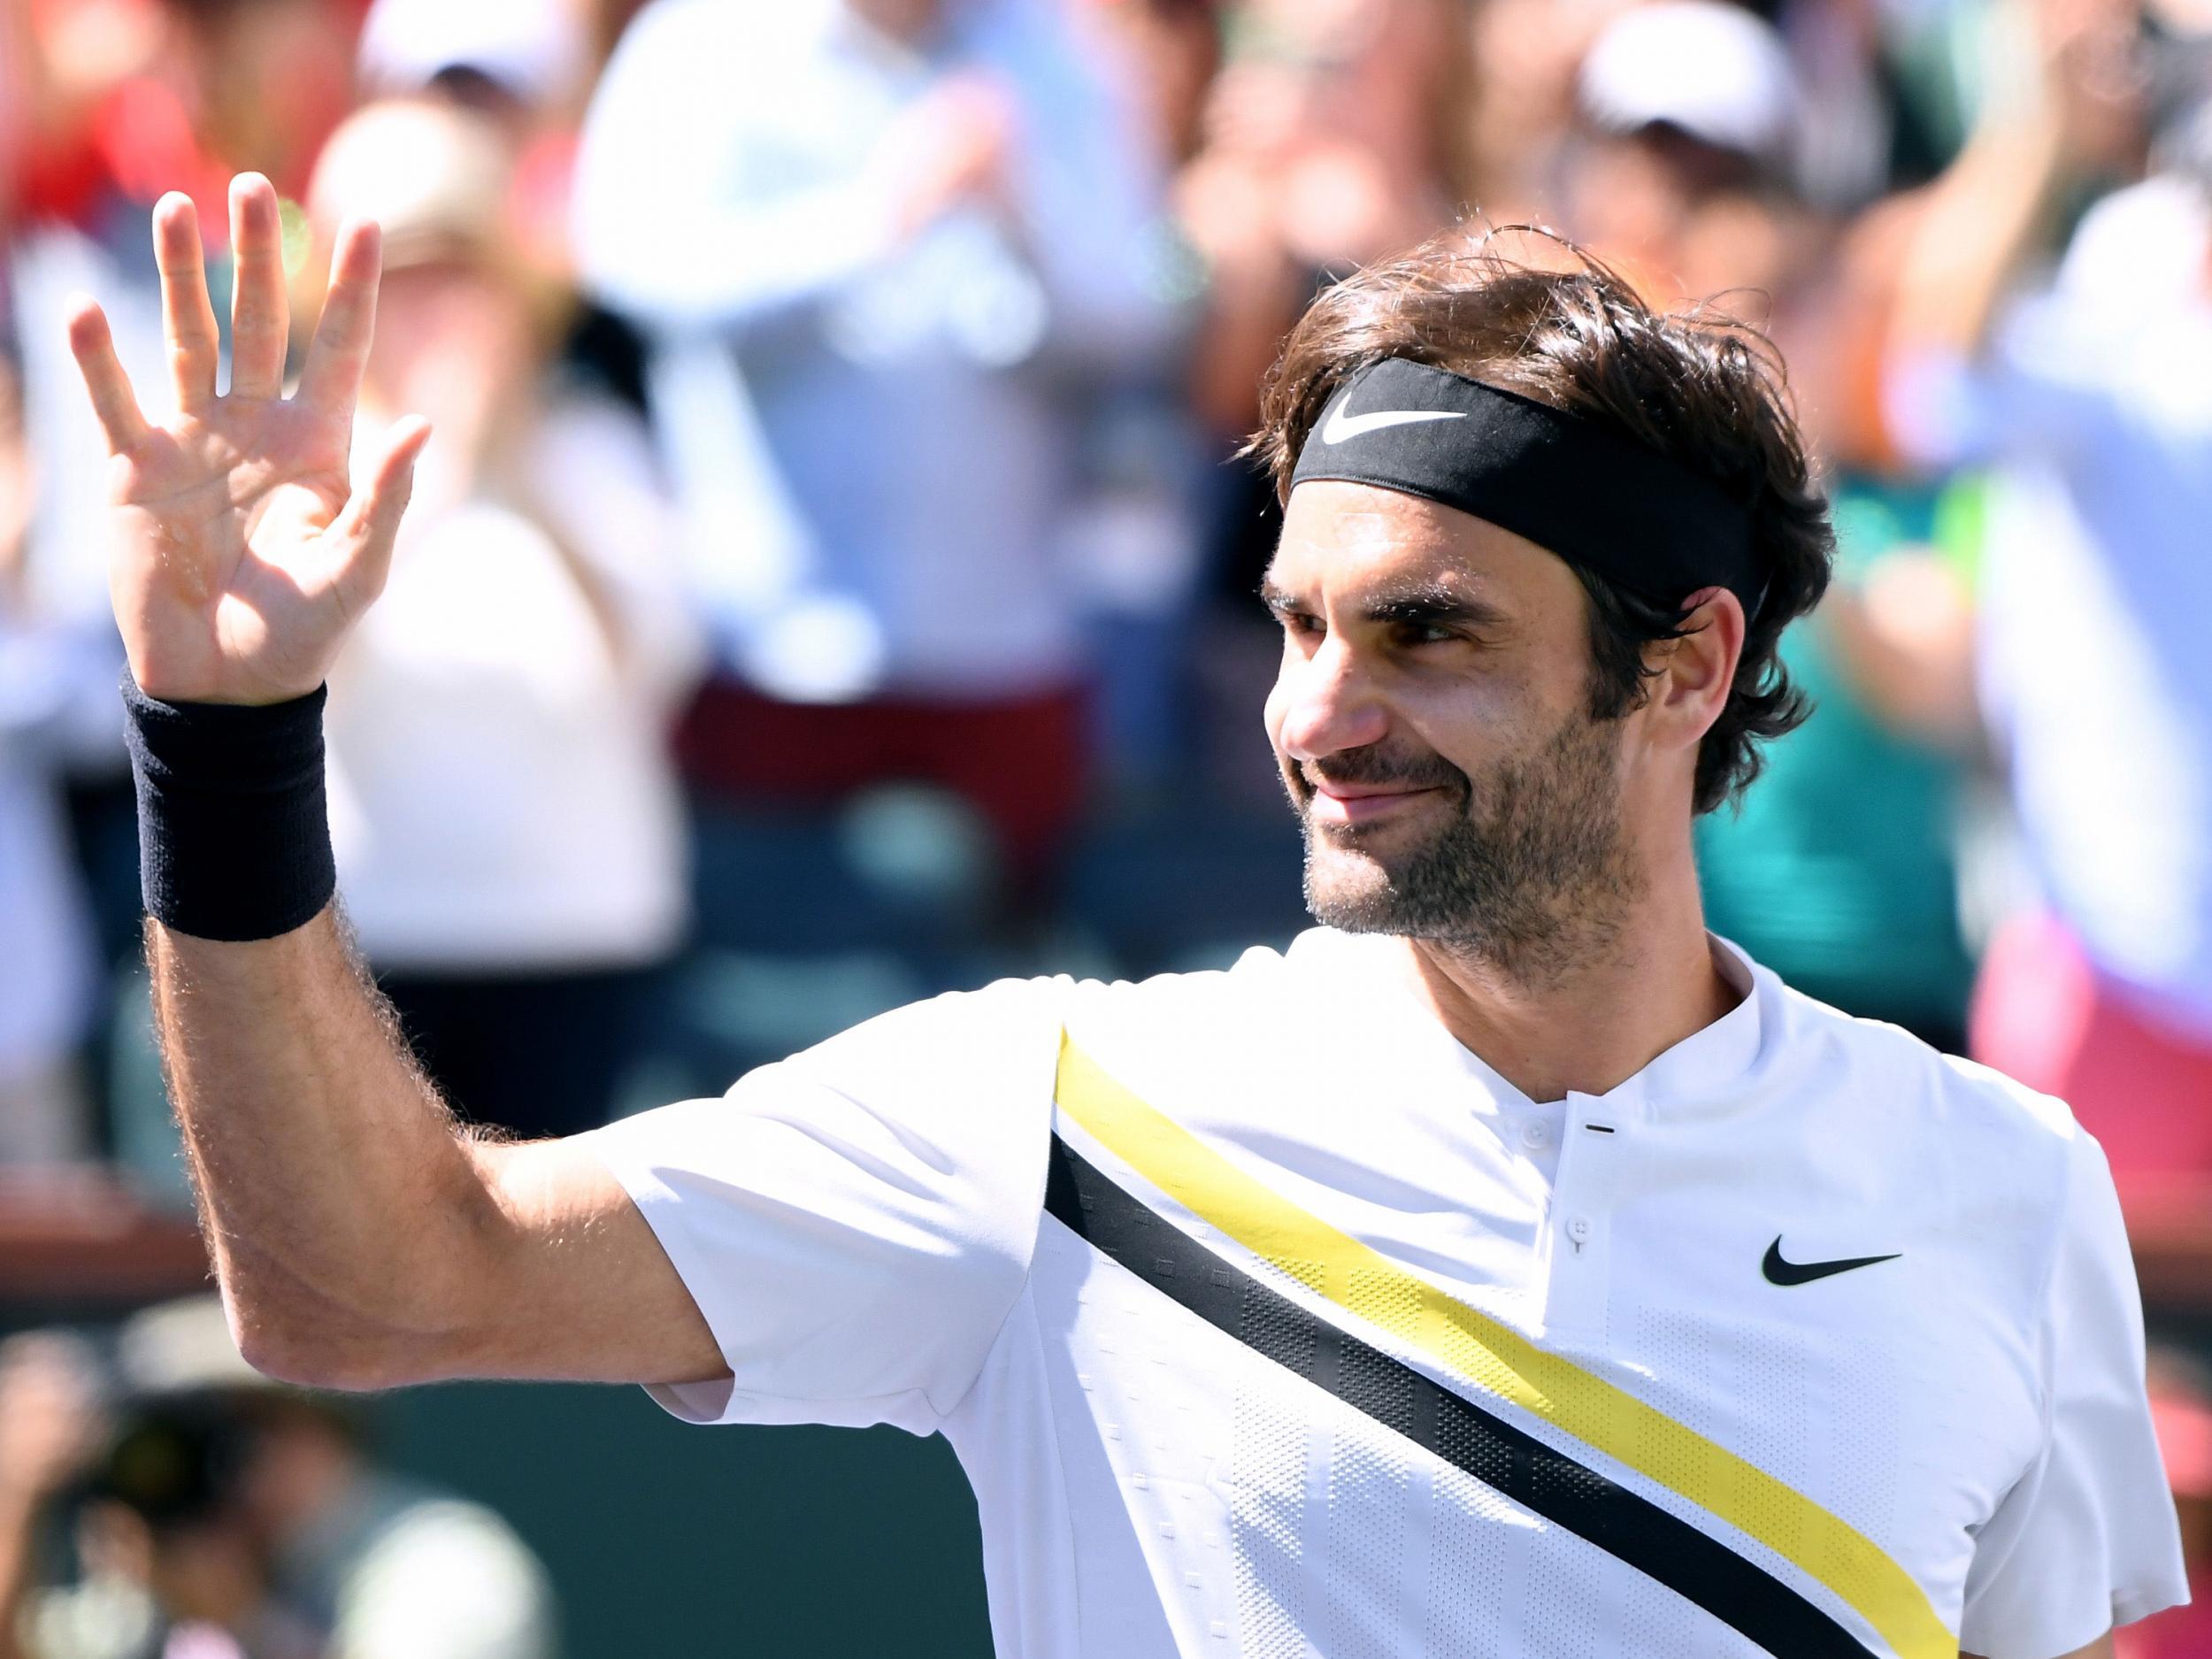 Roger Federer is into the Indian Wells final once again